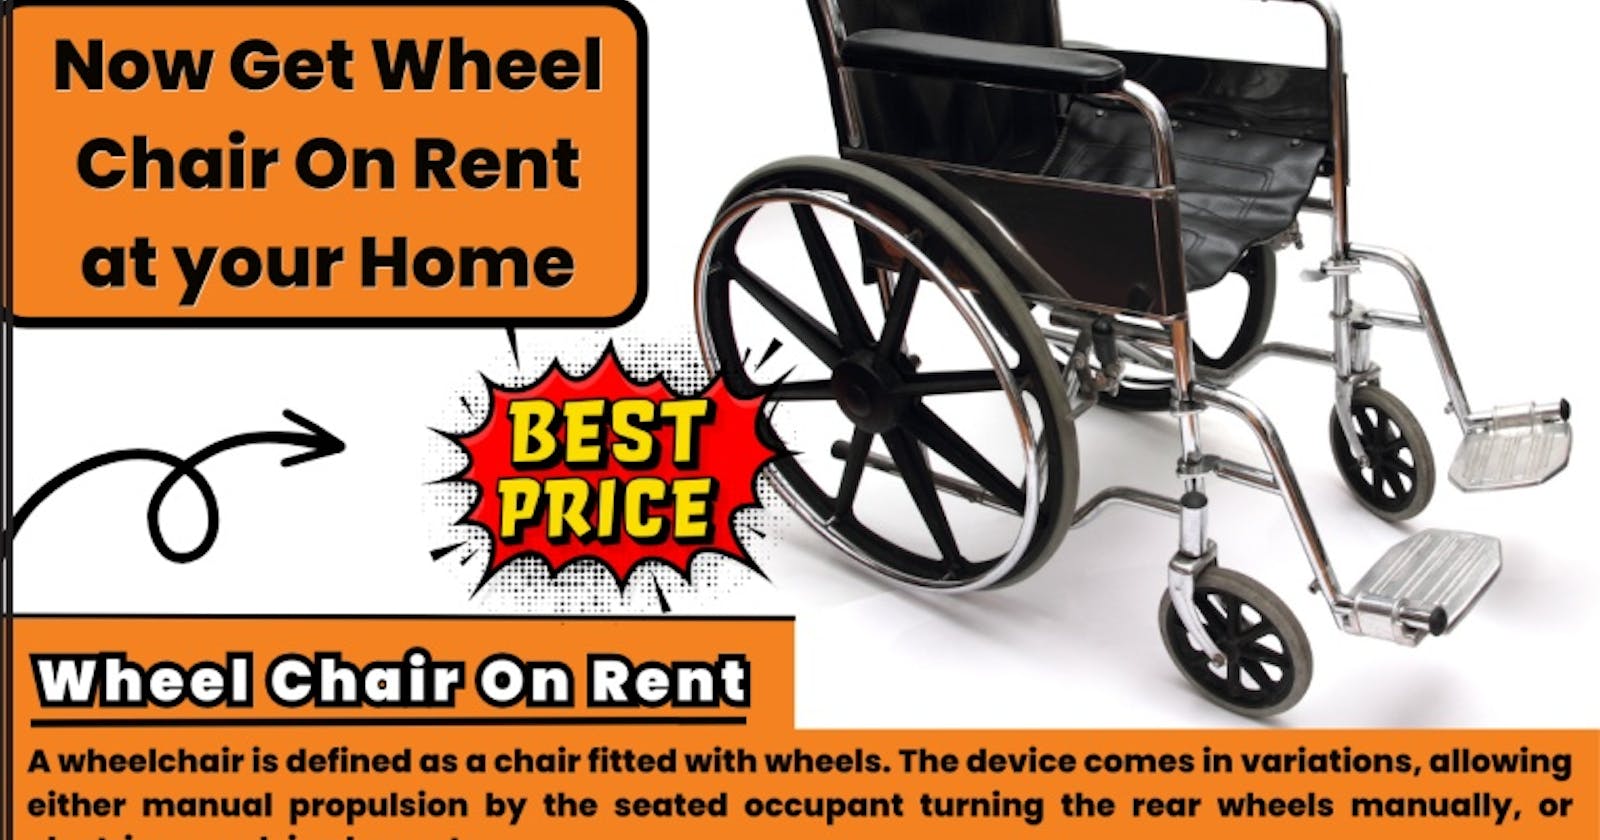 Wheel Chair on Rent Services for Enhanced Mobility.